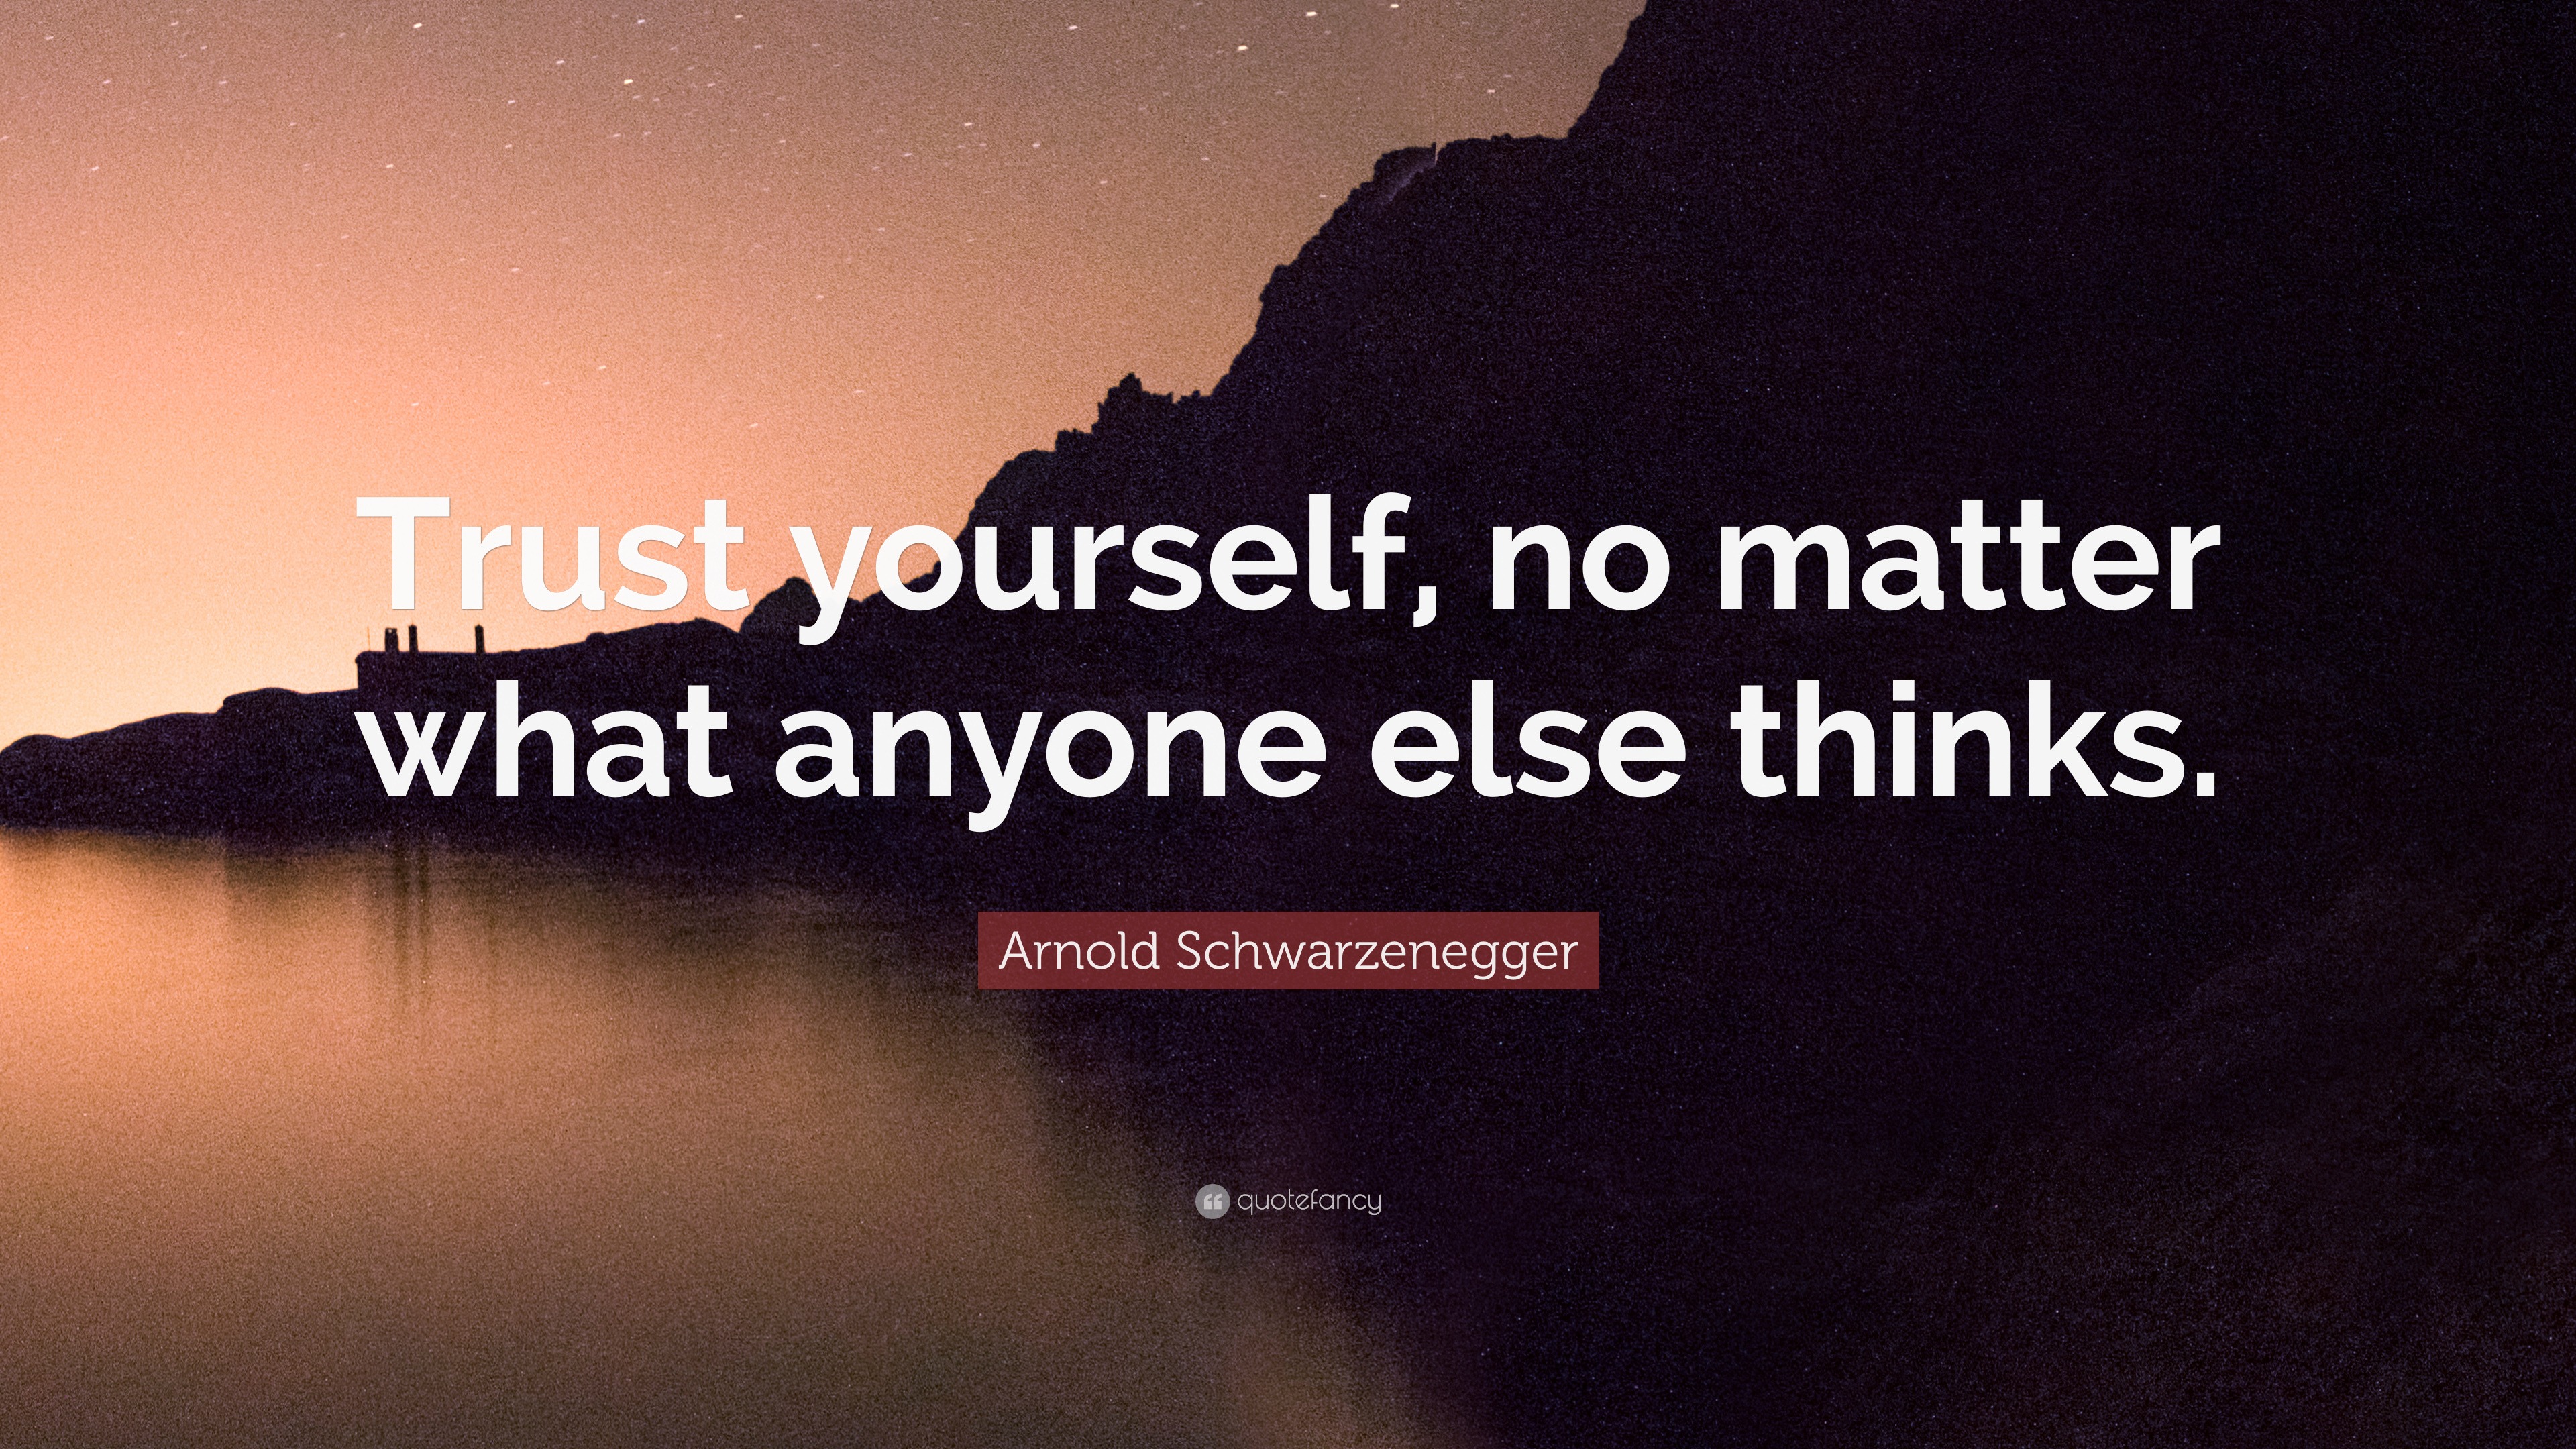 Arnold Schwarzenegger Quote: “Trust yourself, no matter what anyone ...